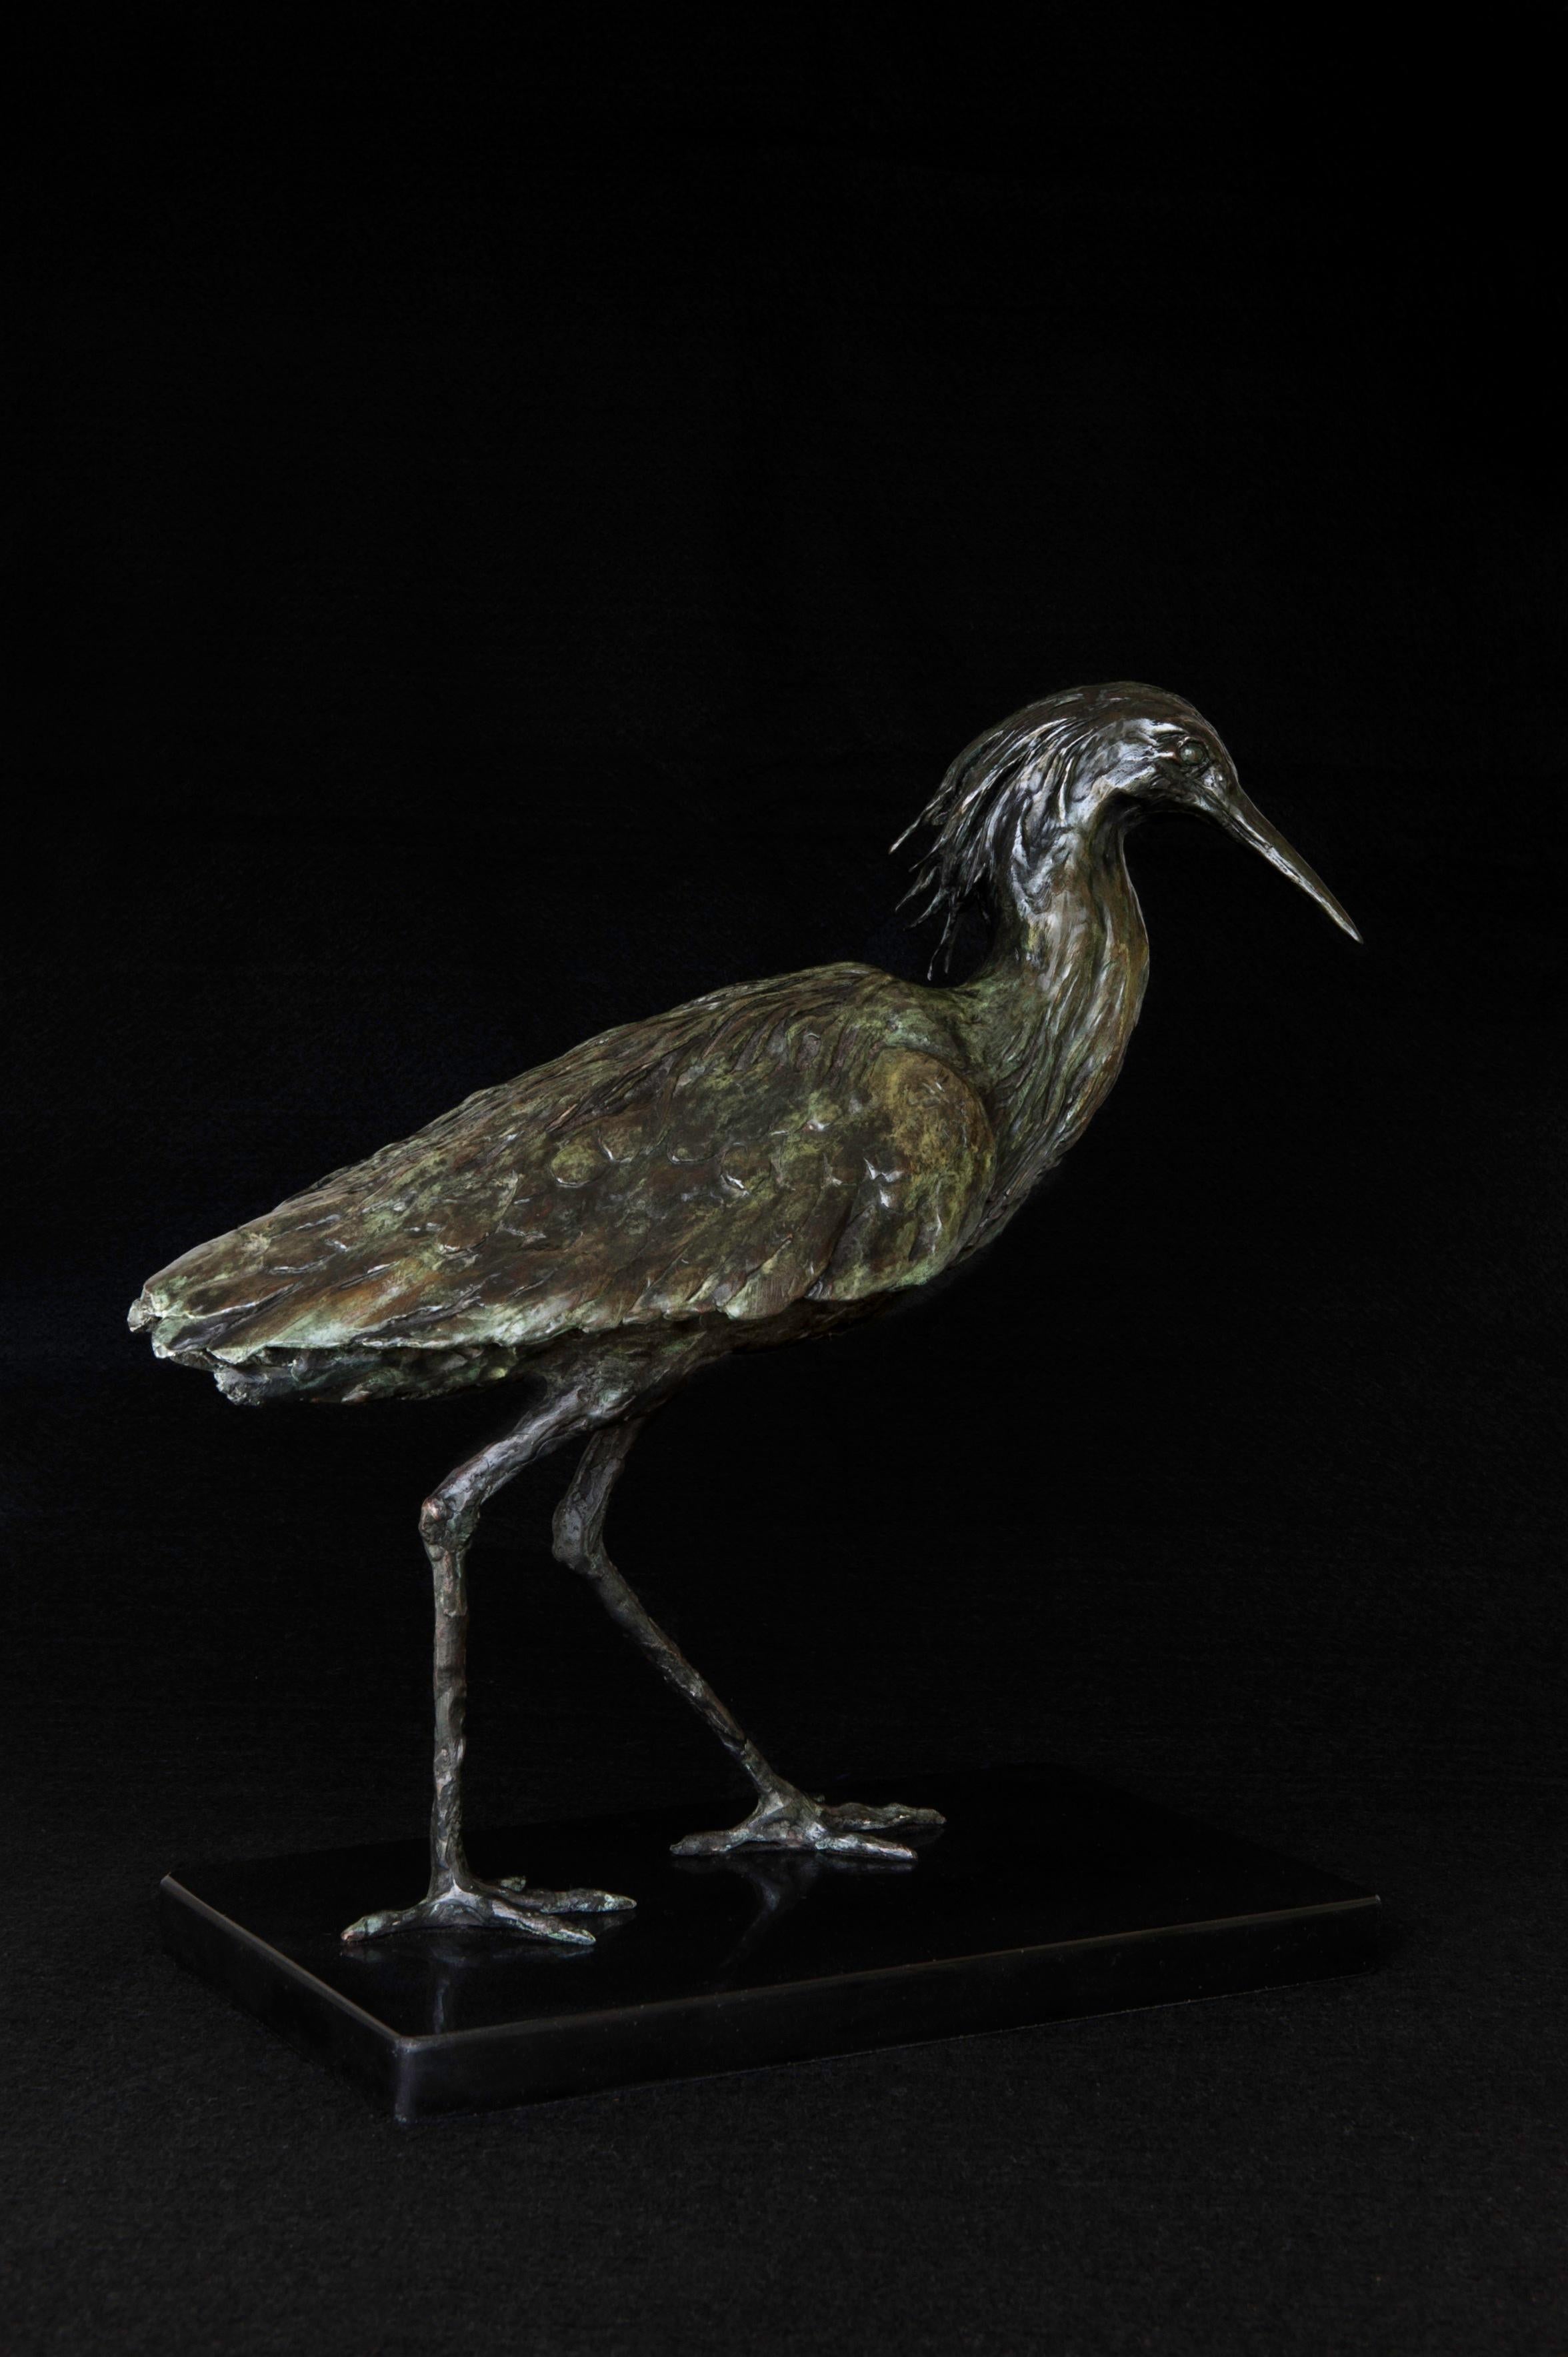 A study in bronze Egretta ardesiaca – Black Heron
Famous for its “umbrella” feeding technique in which it hunts for food inside of its own spread and curled wings.

Edition 1 of 9. Limited Edition of 9. Bronze sculpture with black verdigris patina